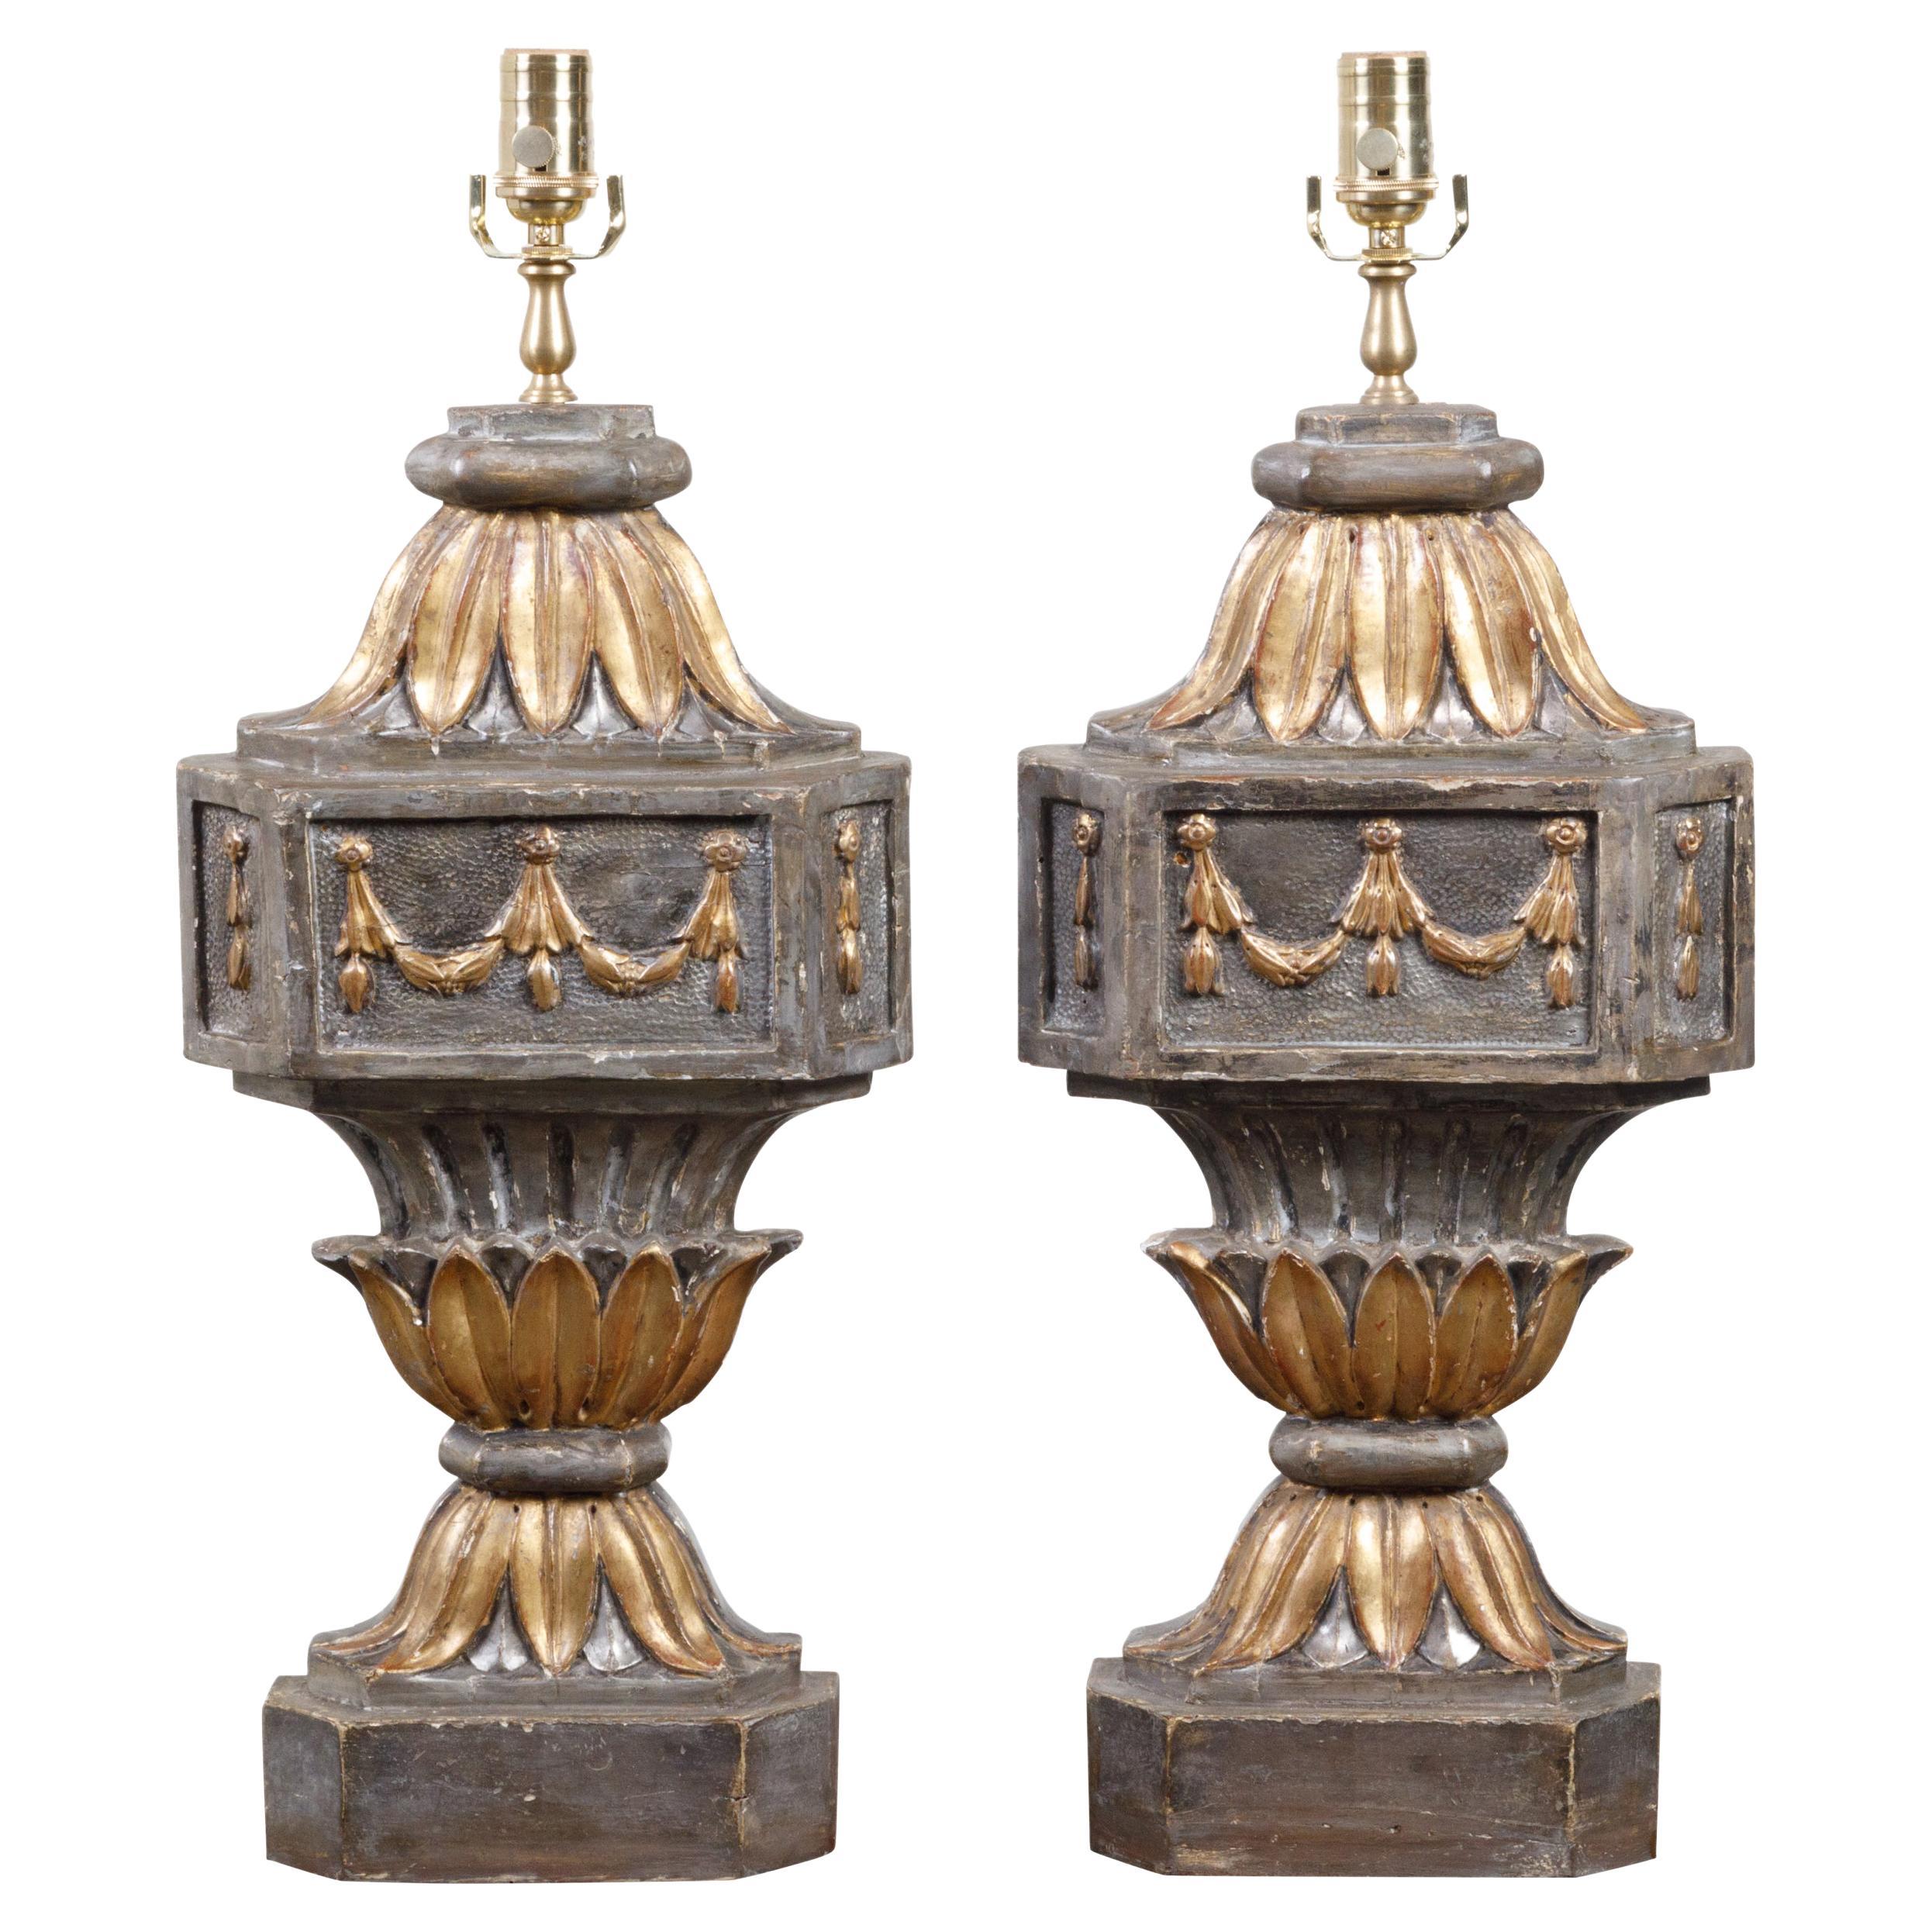 Pair of French 18th Century Carved and Gilded Fragments Made into Table Lamps